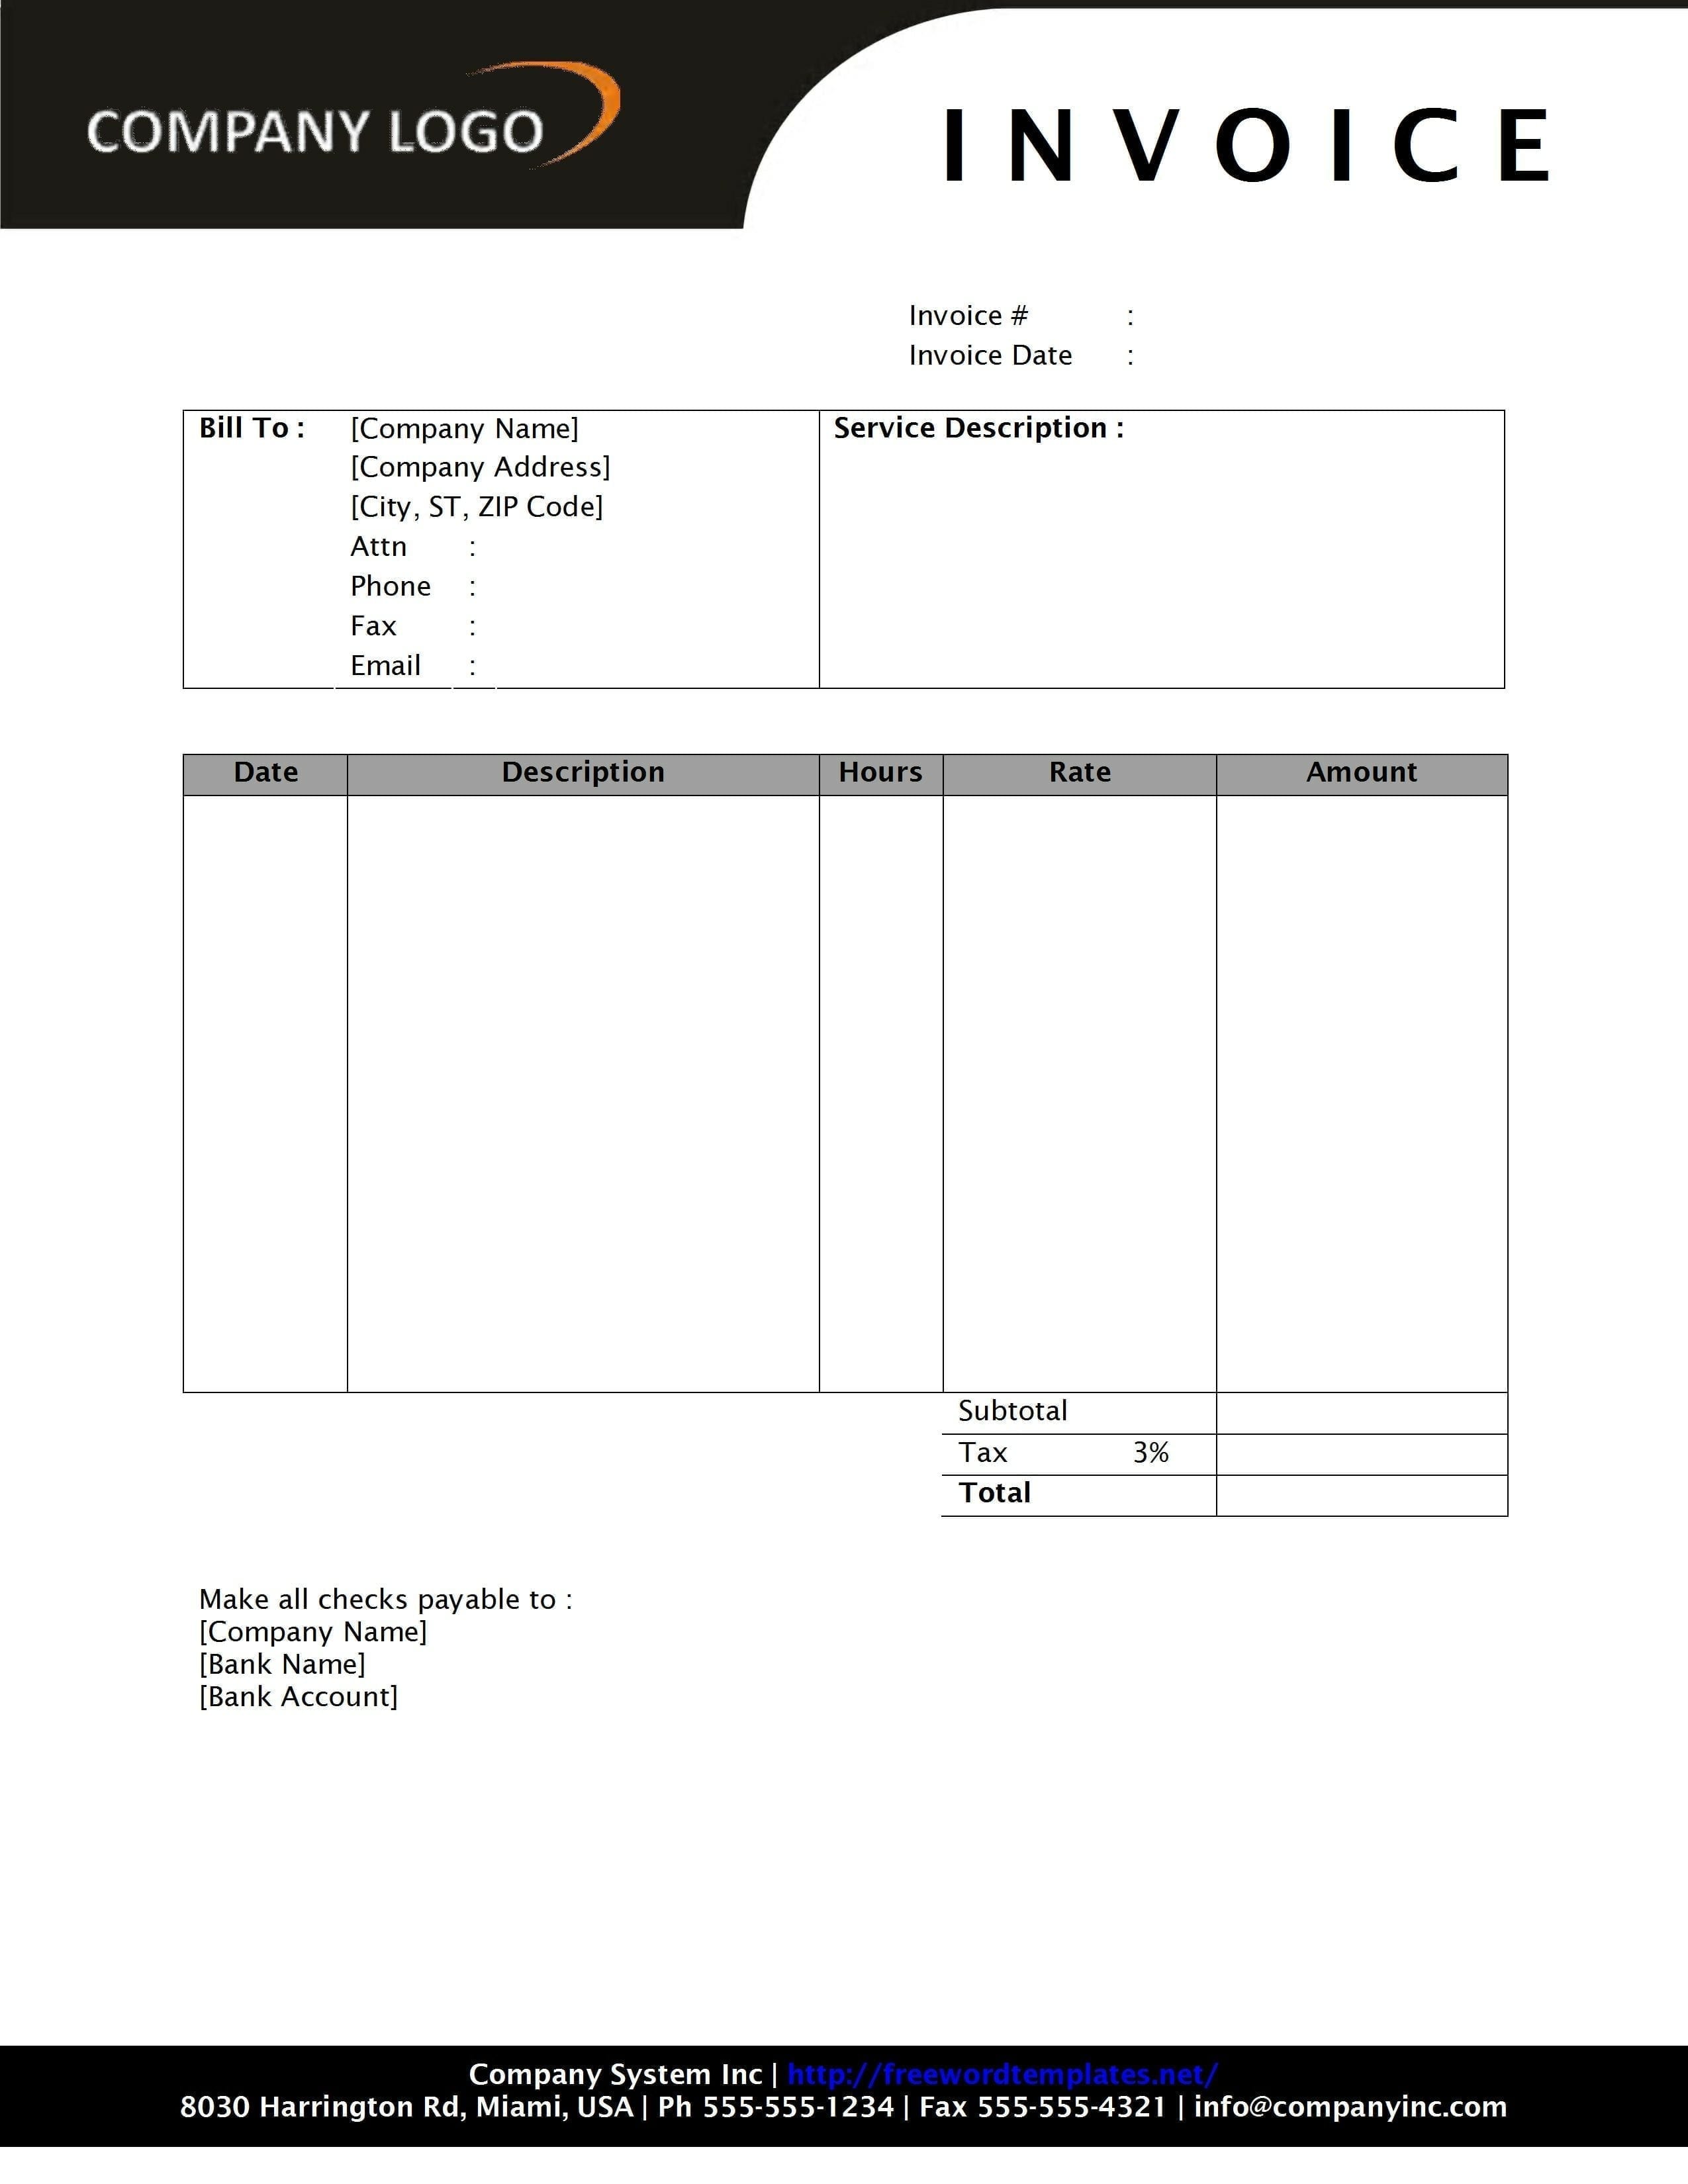 How To Create An Invoice In Word 2010 Bdabig